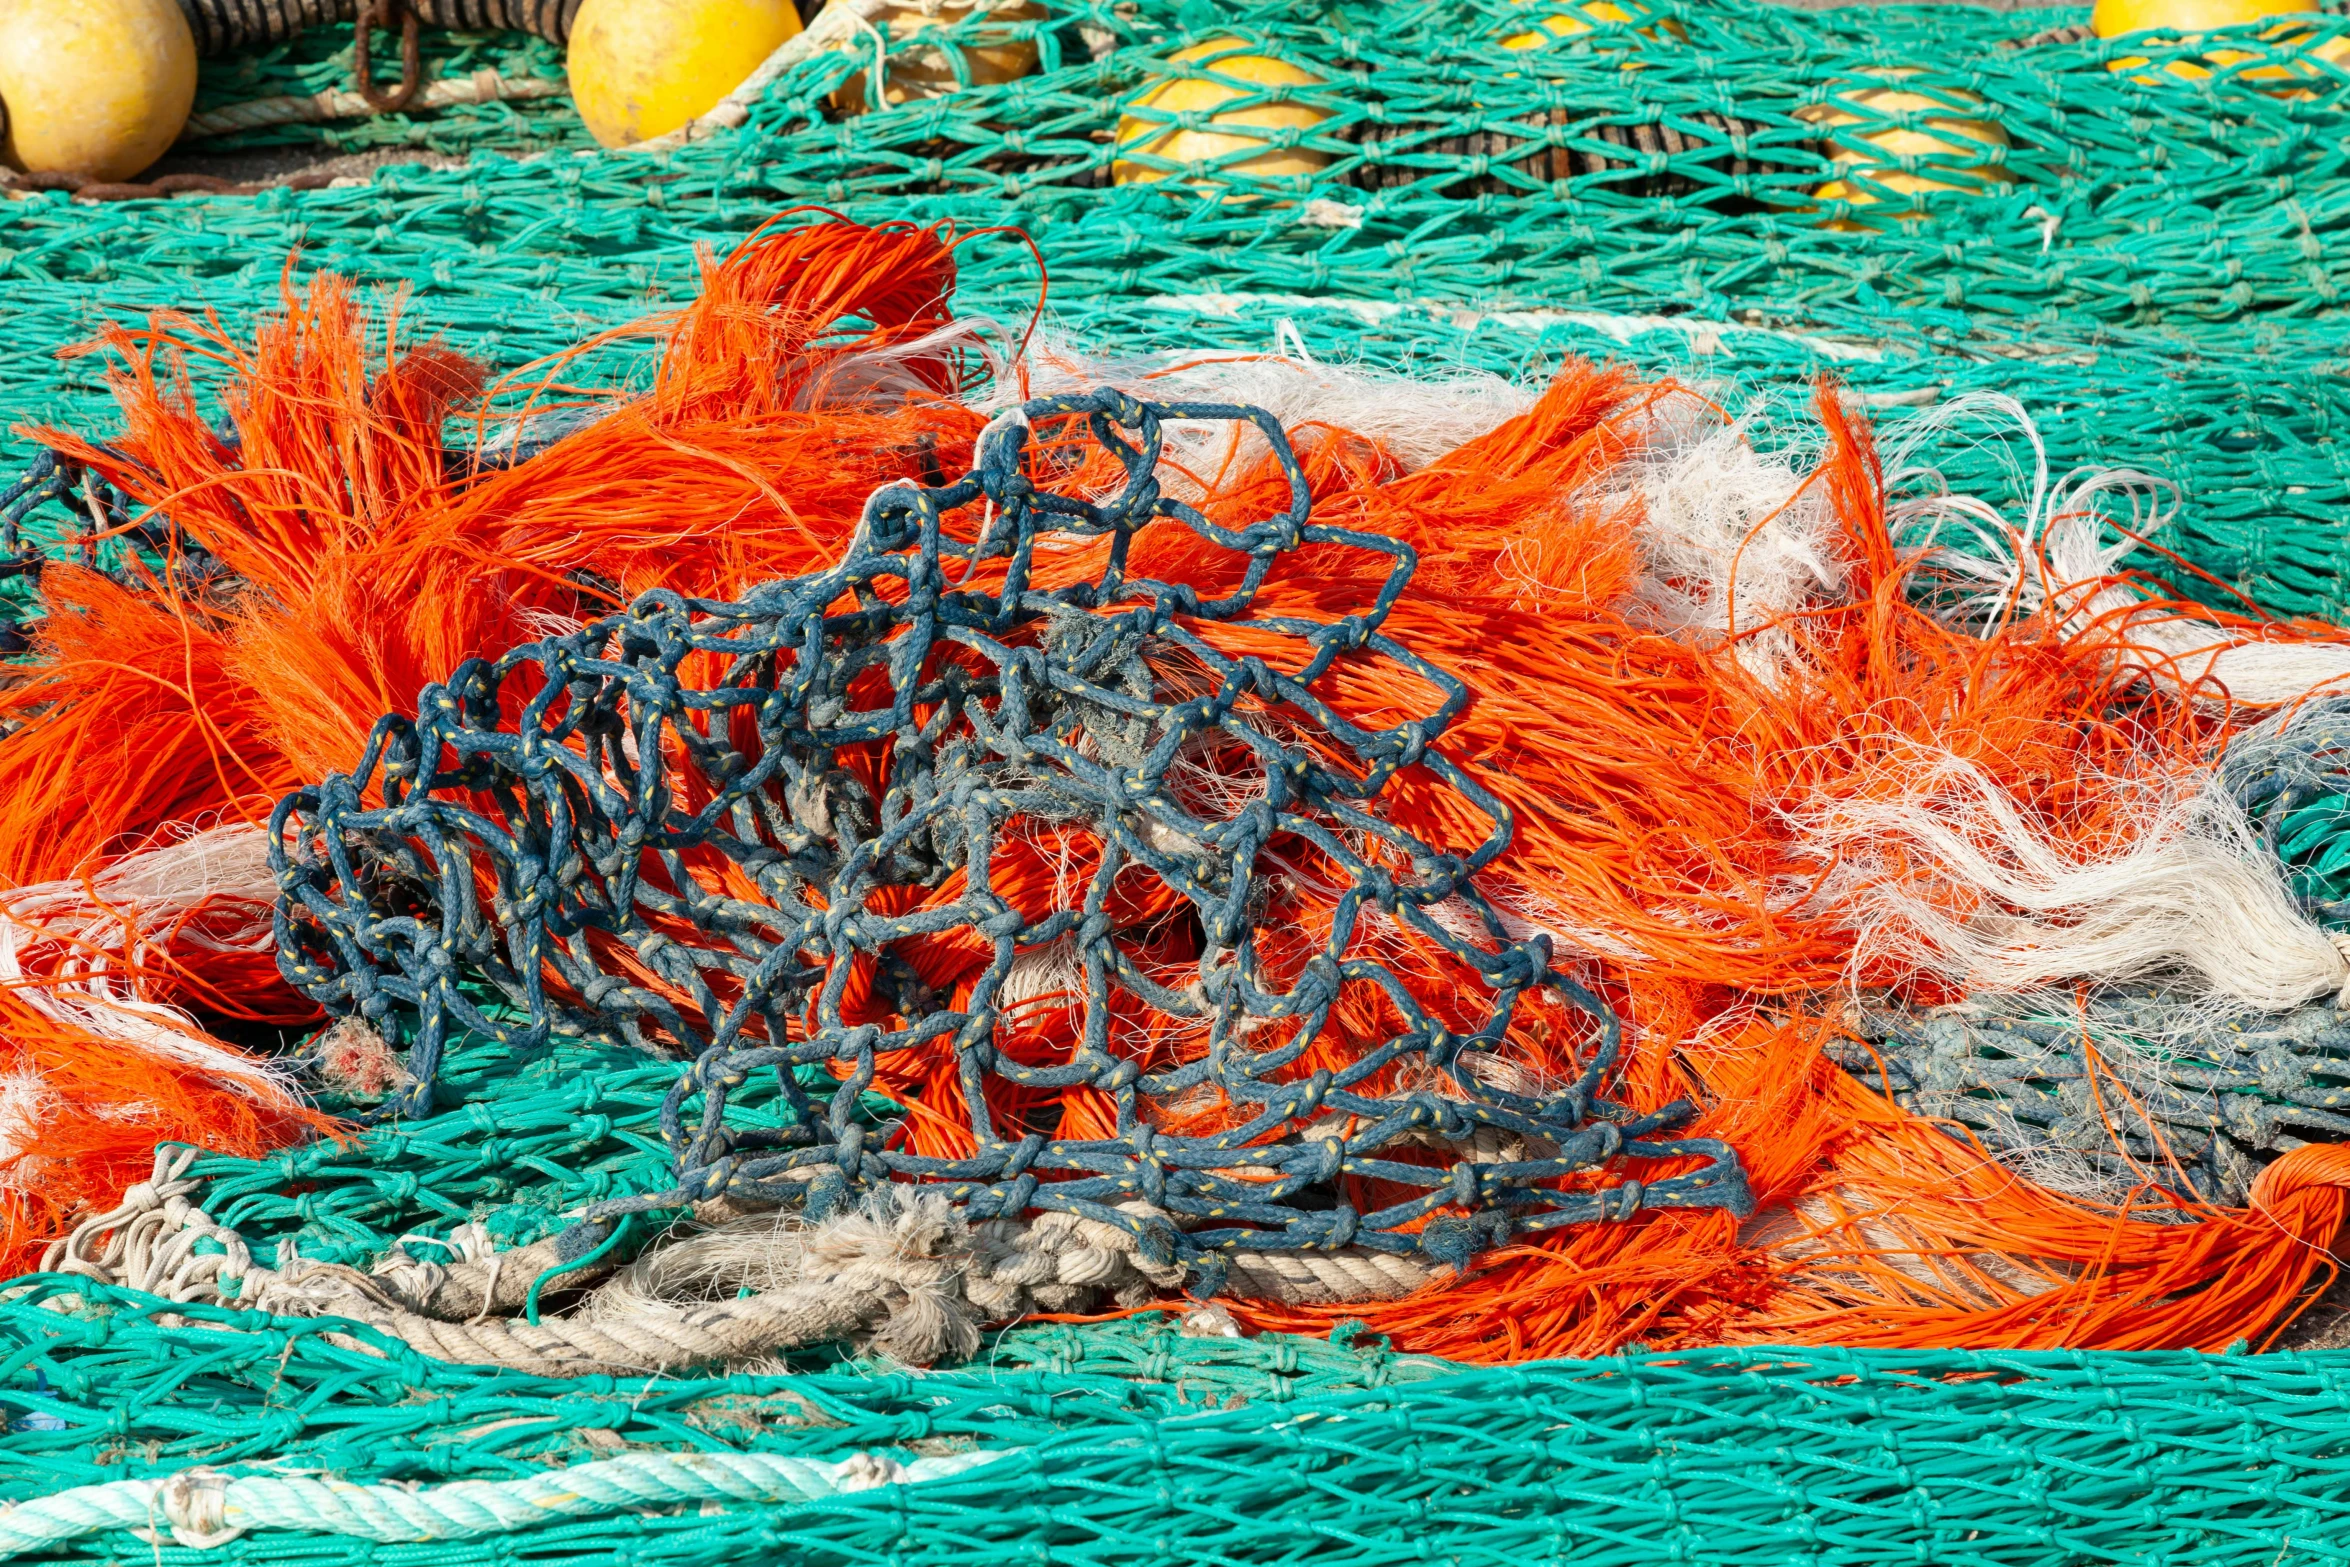 orange and grey ropes are on a turquoise colored tablecloth